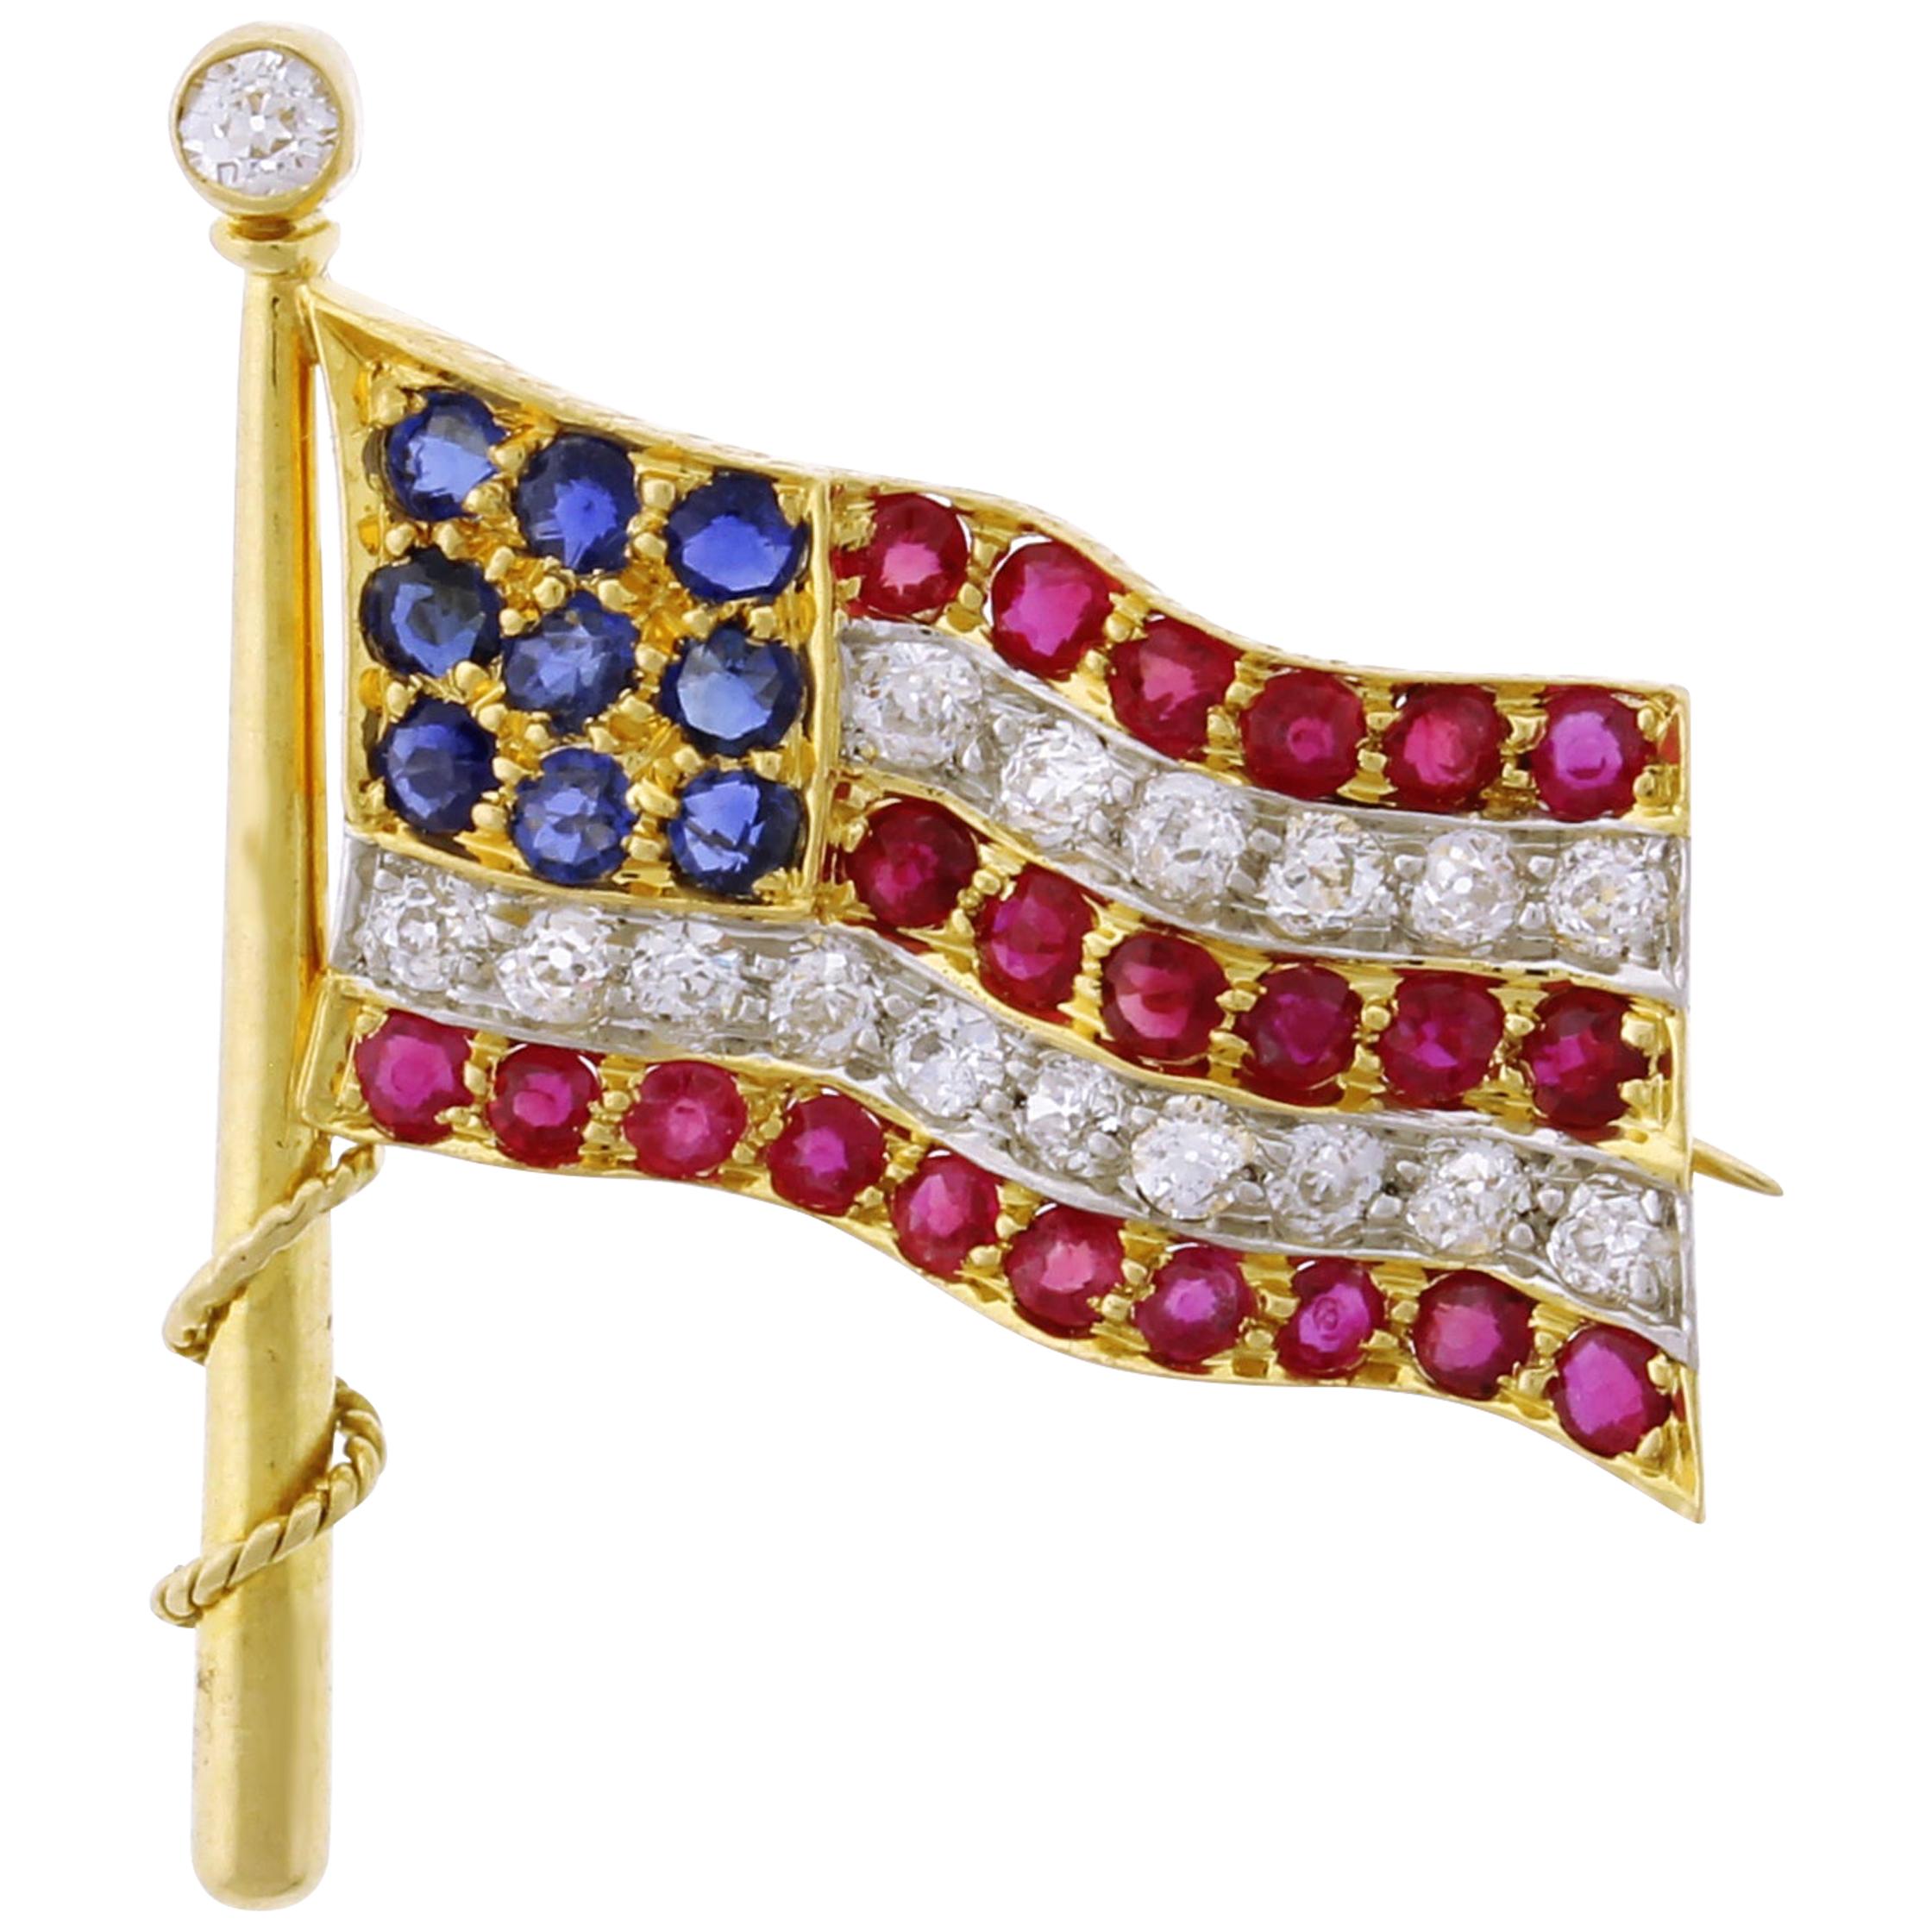 United States Antique Ruby Diamond and Sapphire Flag Pin/Brooch